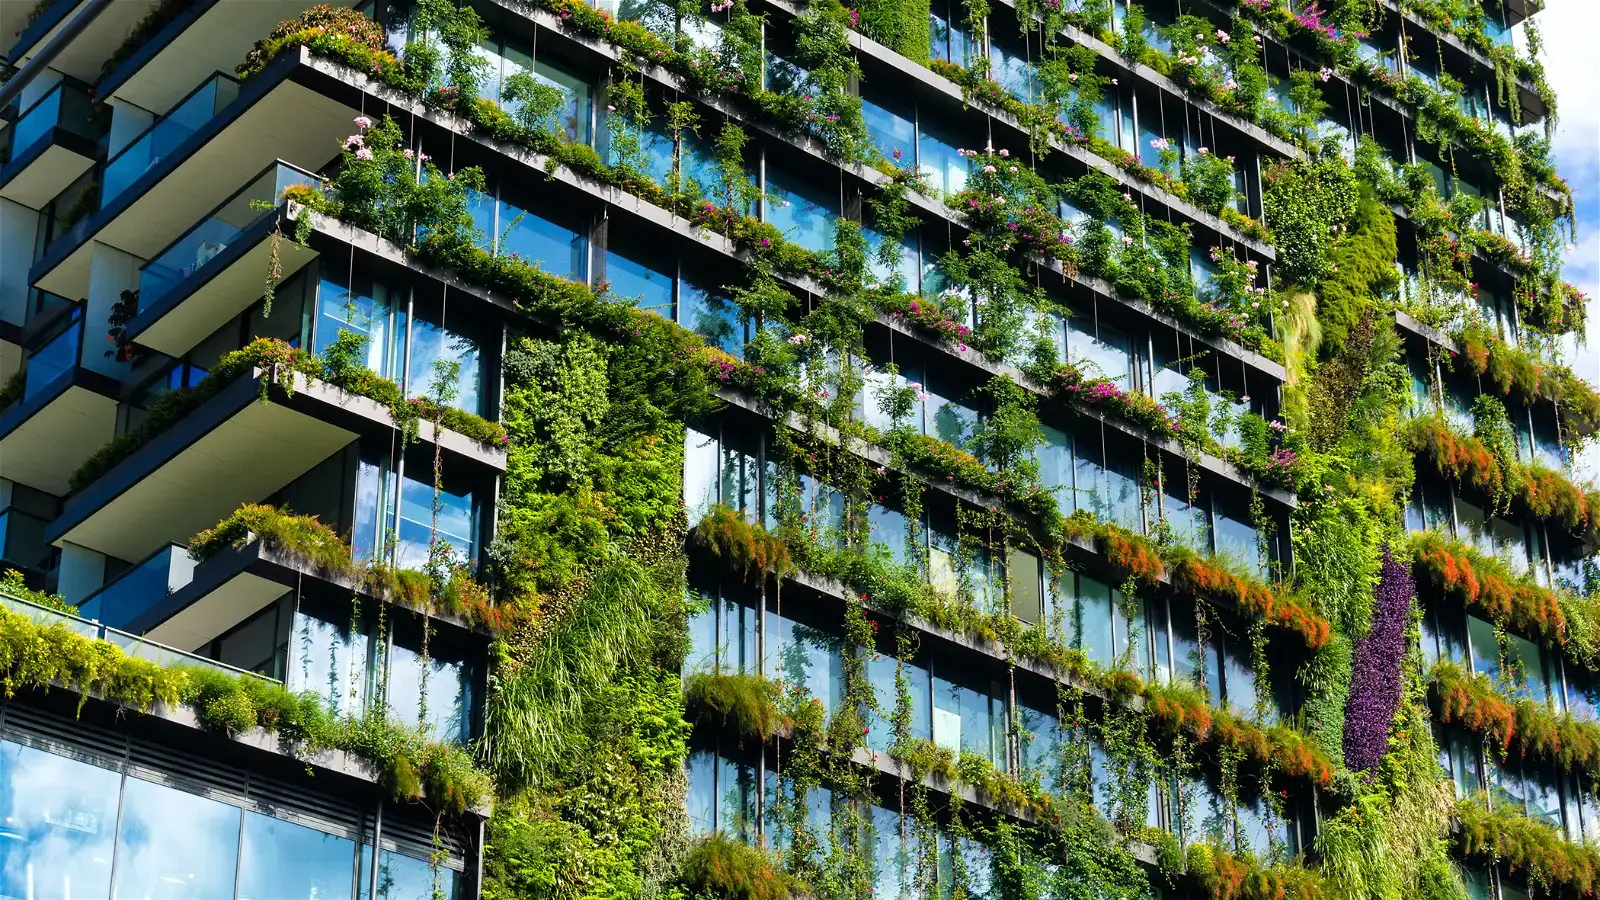 The future of green real estate: Net zero energy buildings and technological innovations